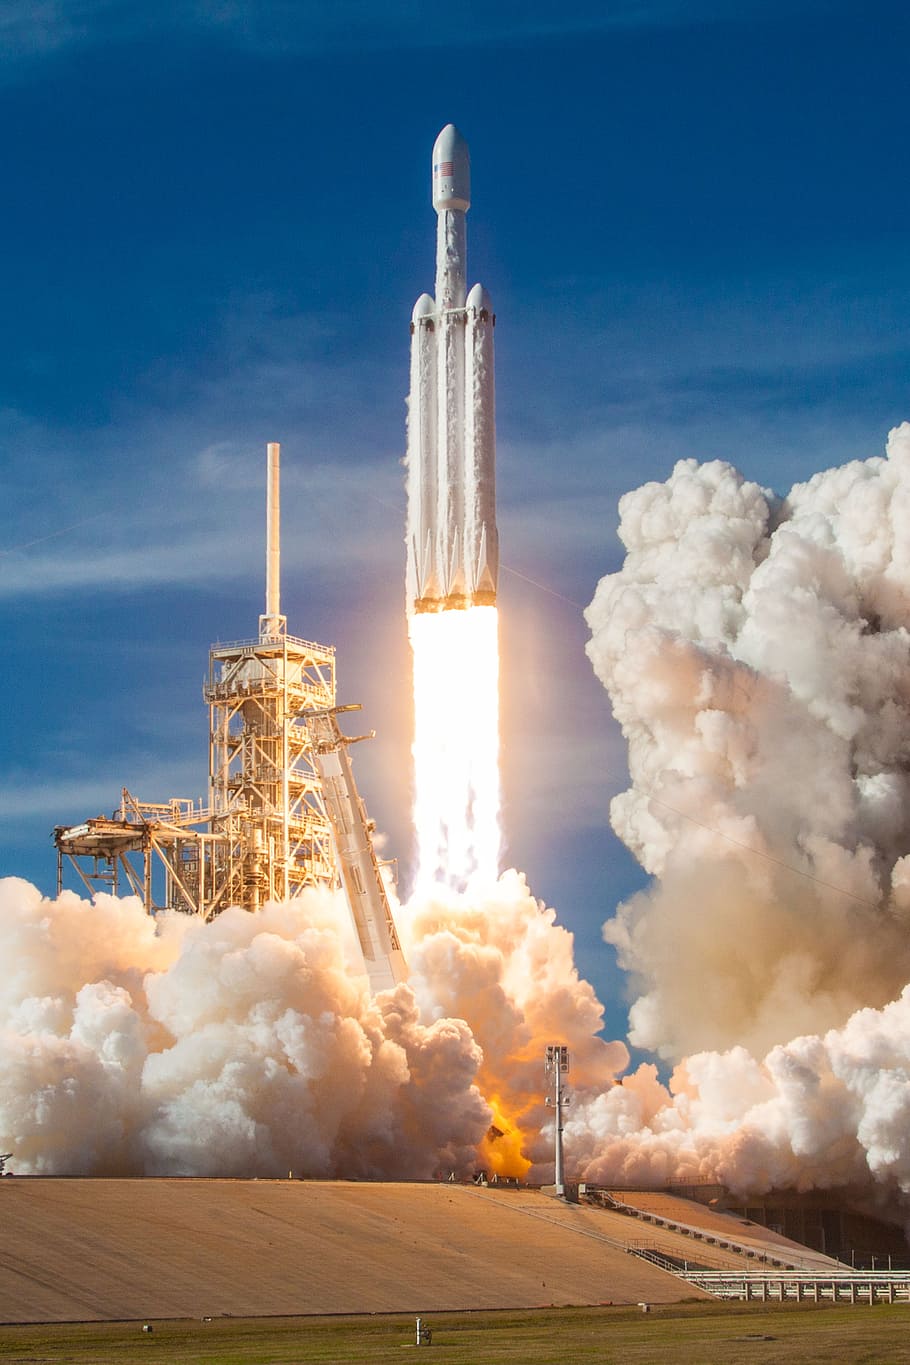 Falcon Heavy, Demo, Mission, launching rocket, sky, smoke - physical structure, cloud - sky, rocket, factory, industry